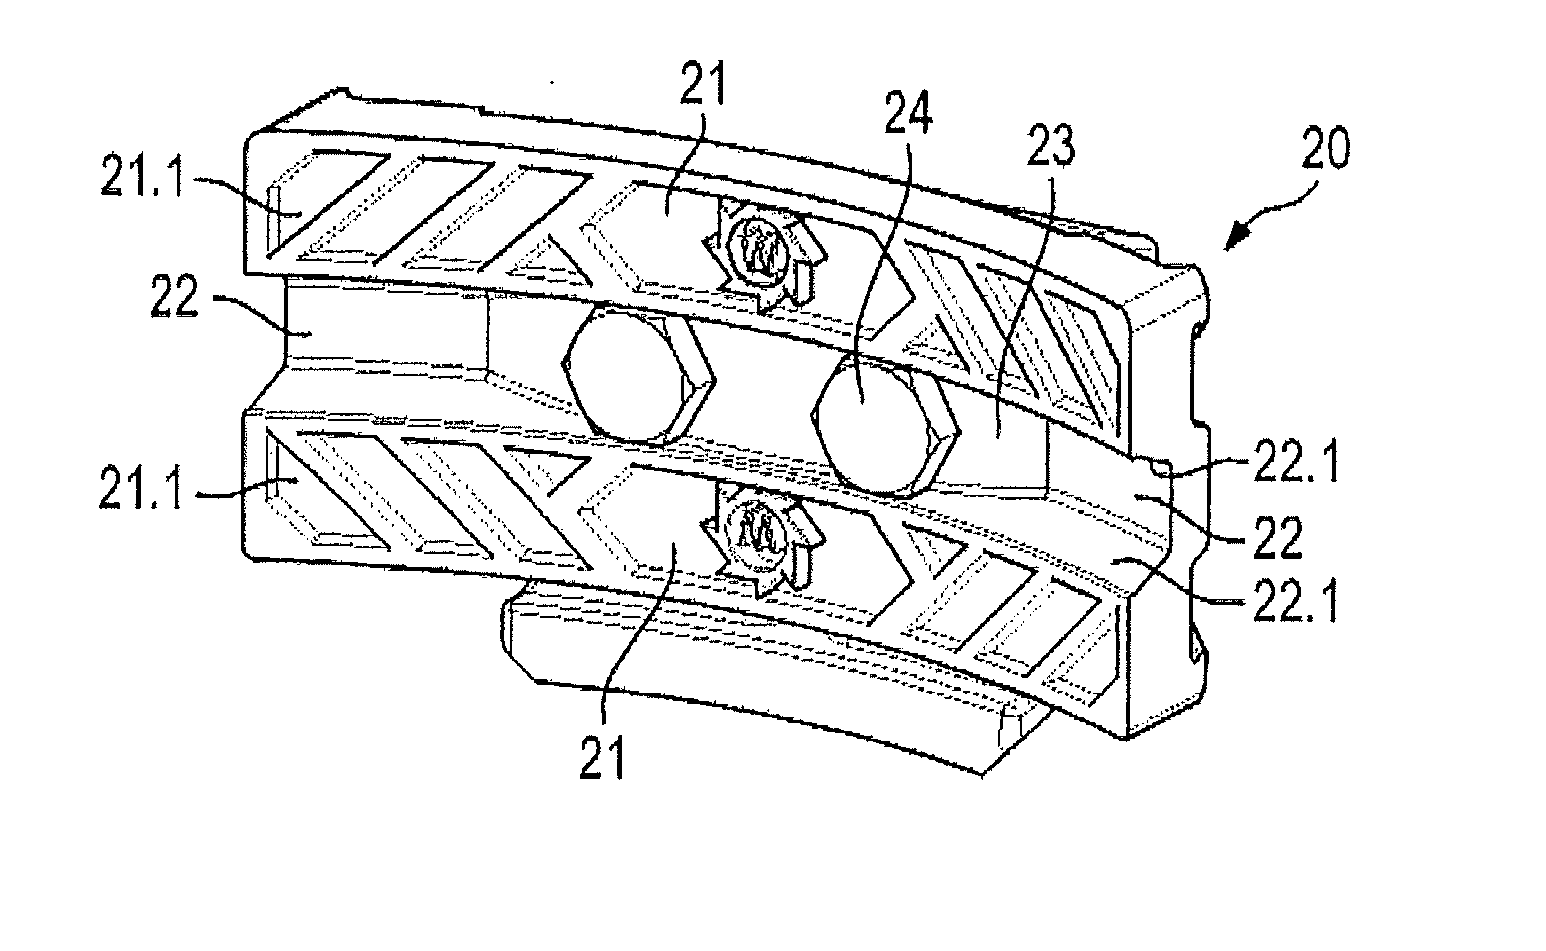 Ejector Unit For A Road Milling Machine Or The Like